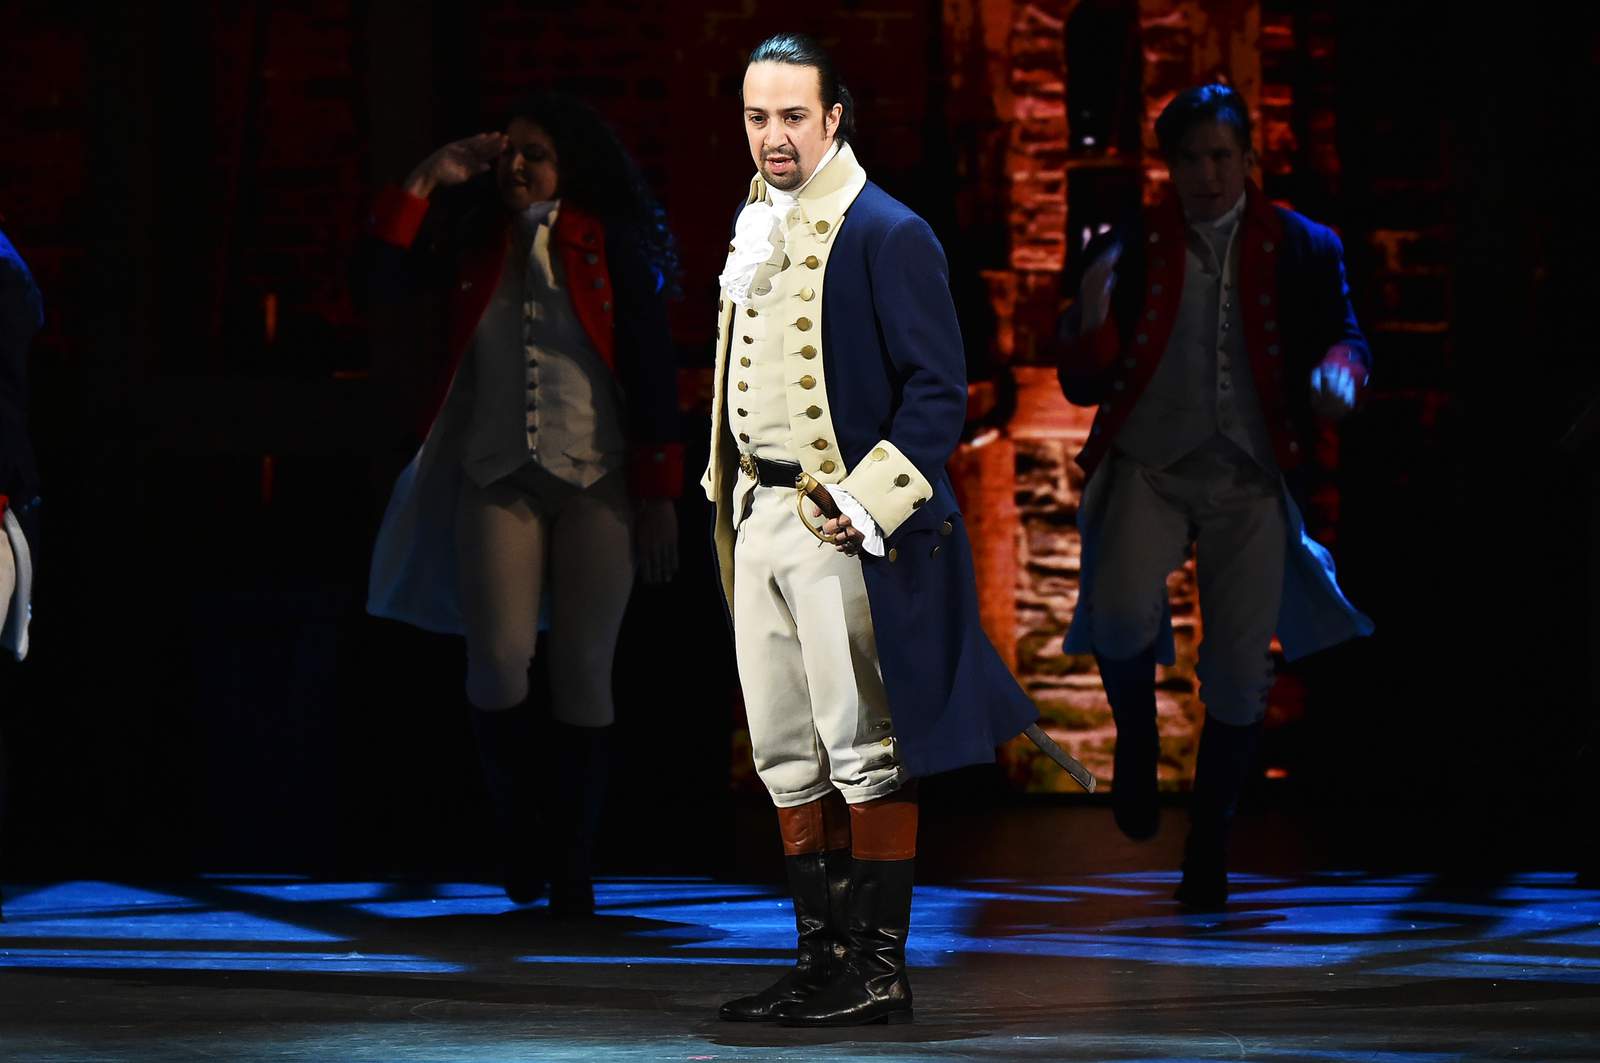 What you need to know before streaming ‘Hamilton’ on Disney+ over the weekend